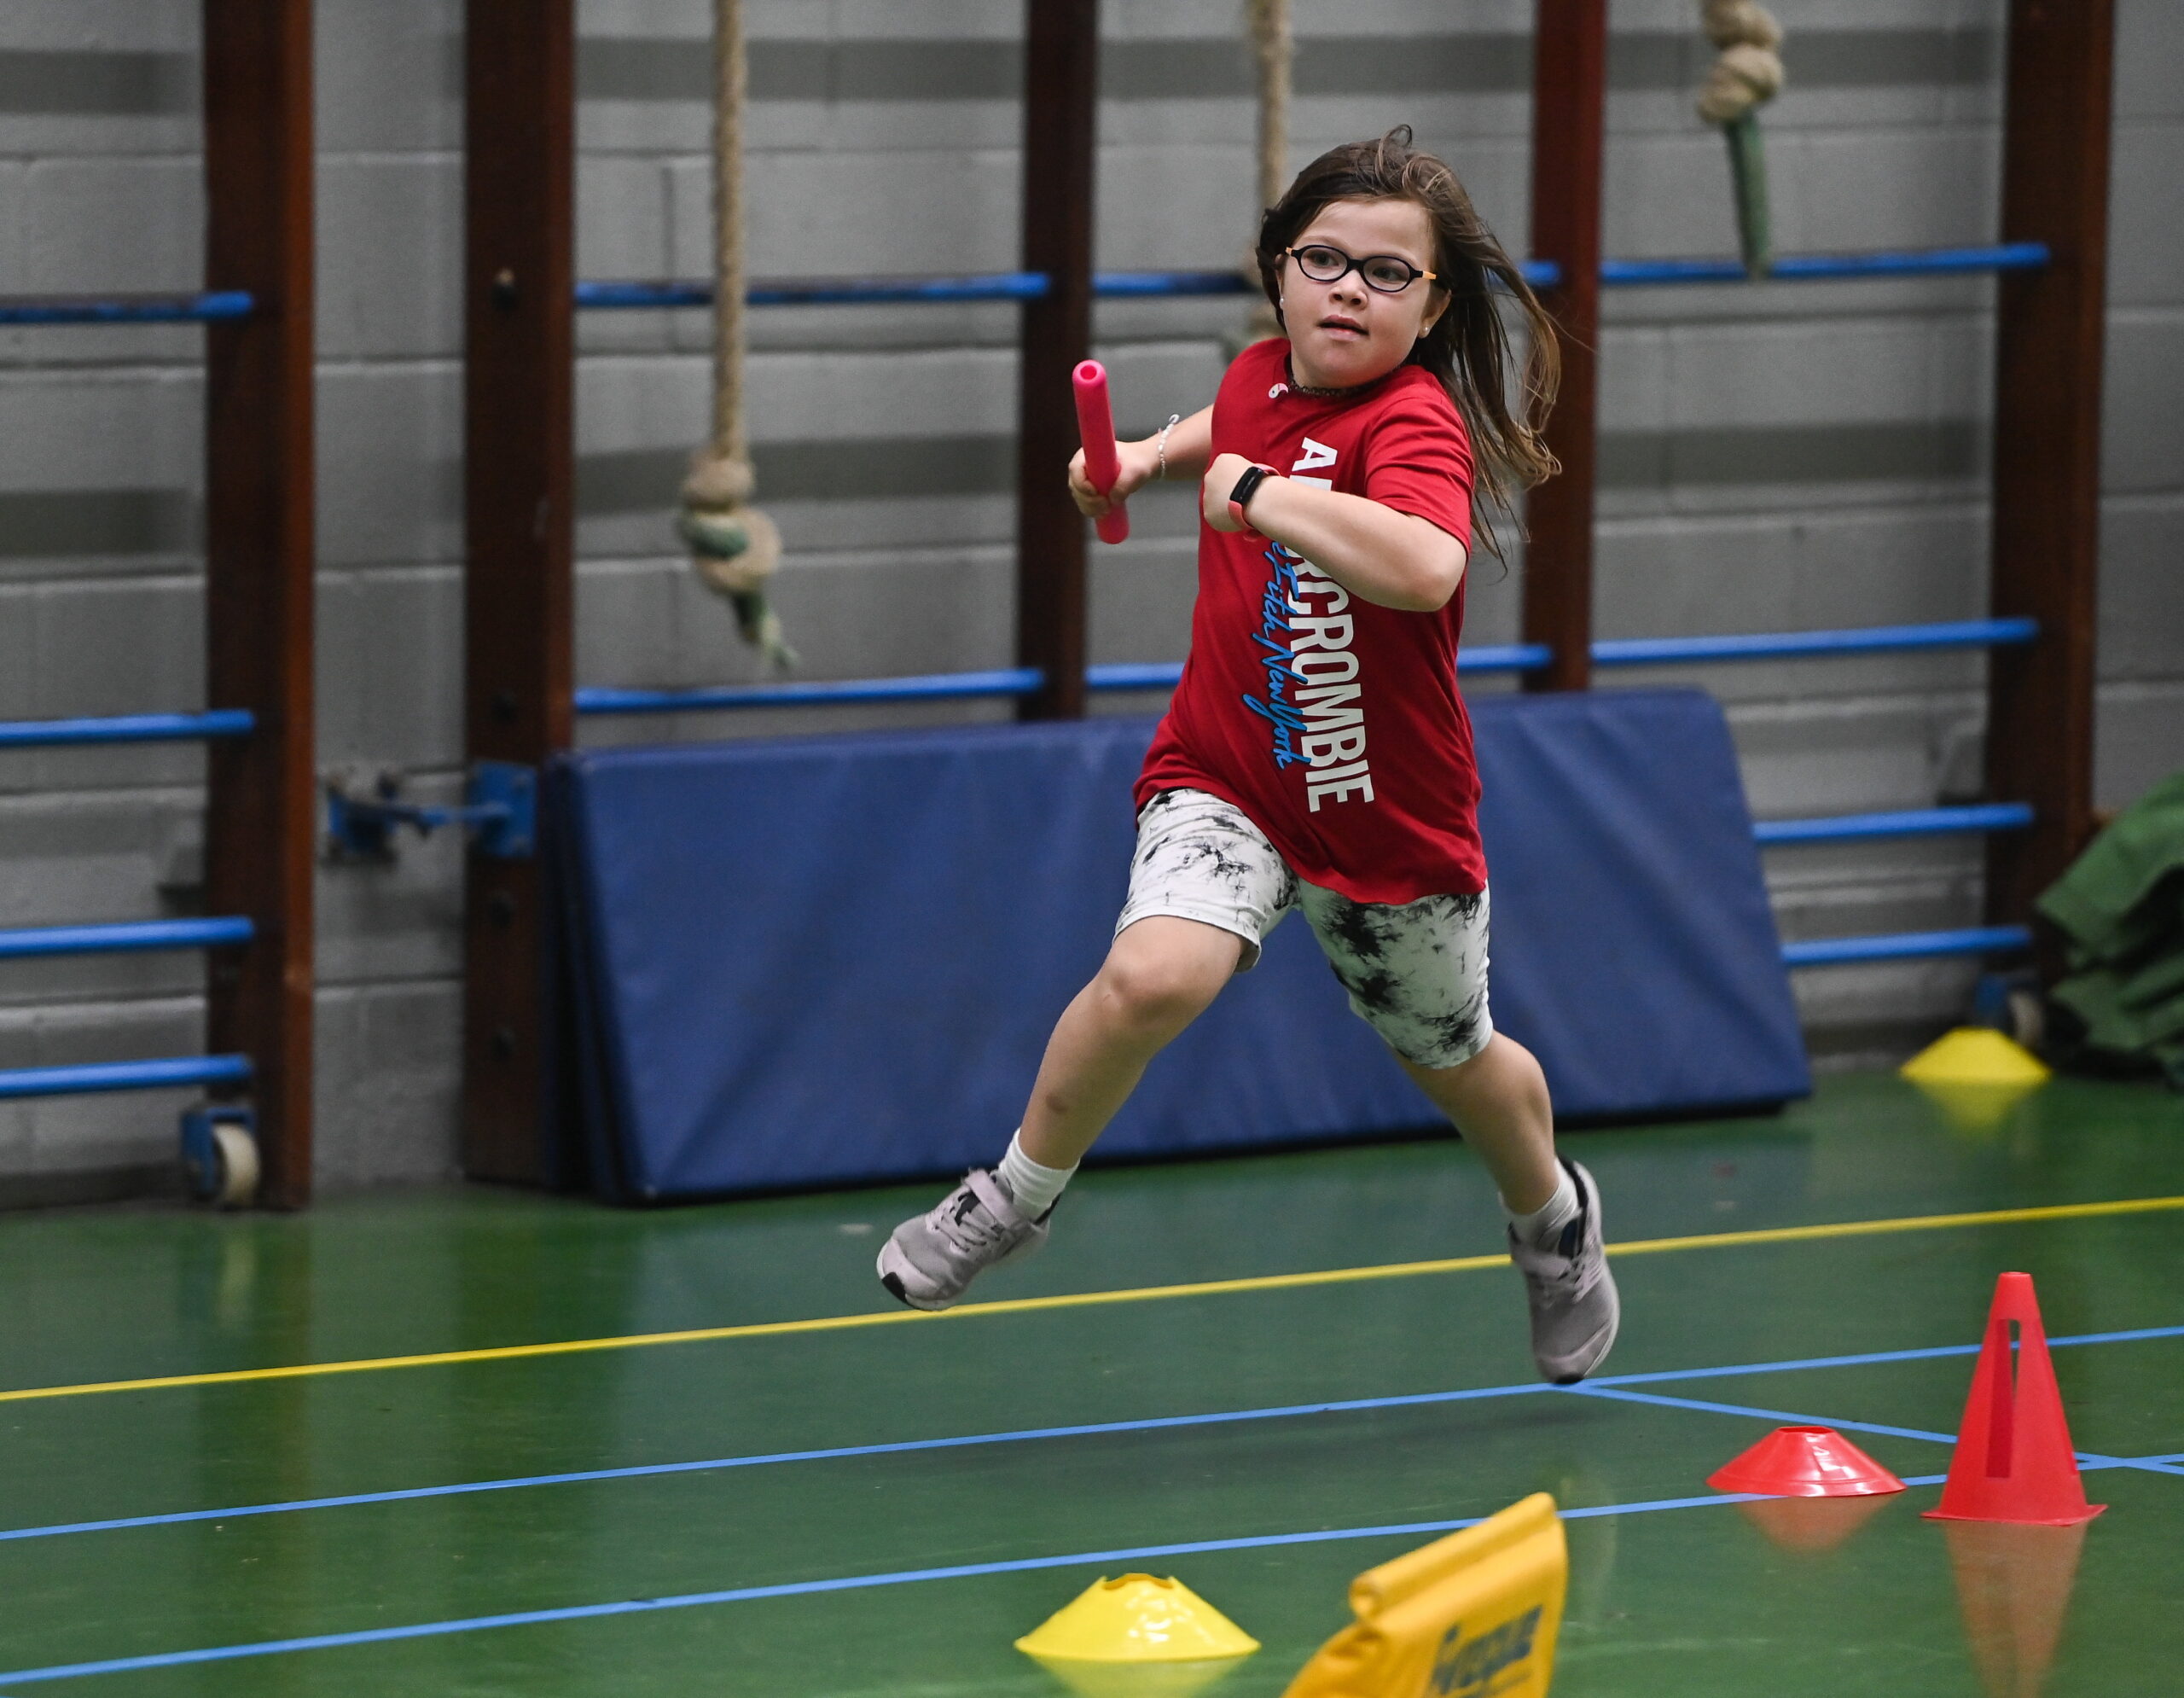 A young girl wearing glasses takes part in a track race and she is holding a red baton.